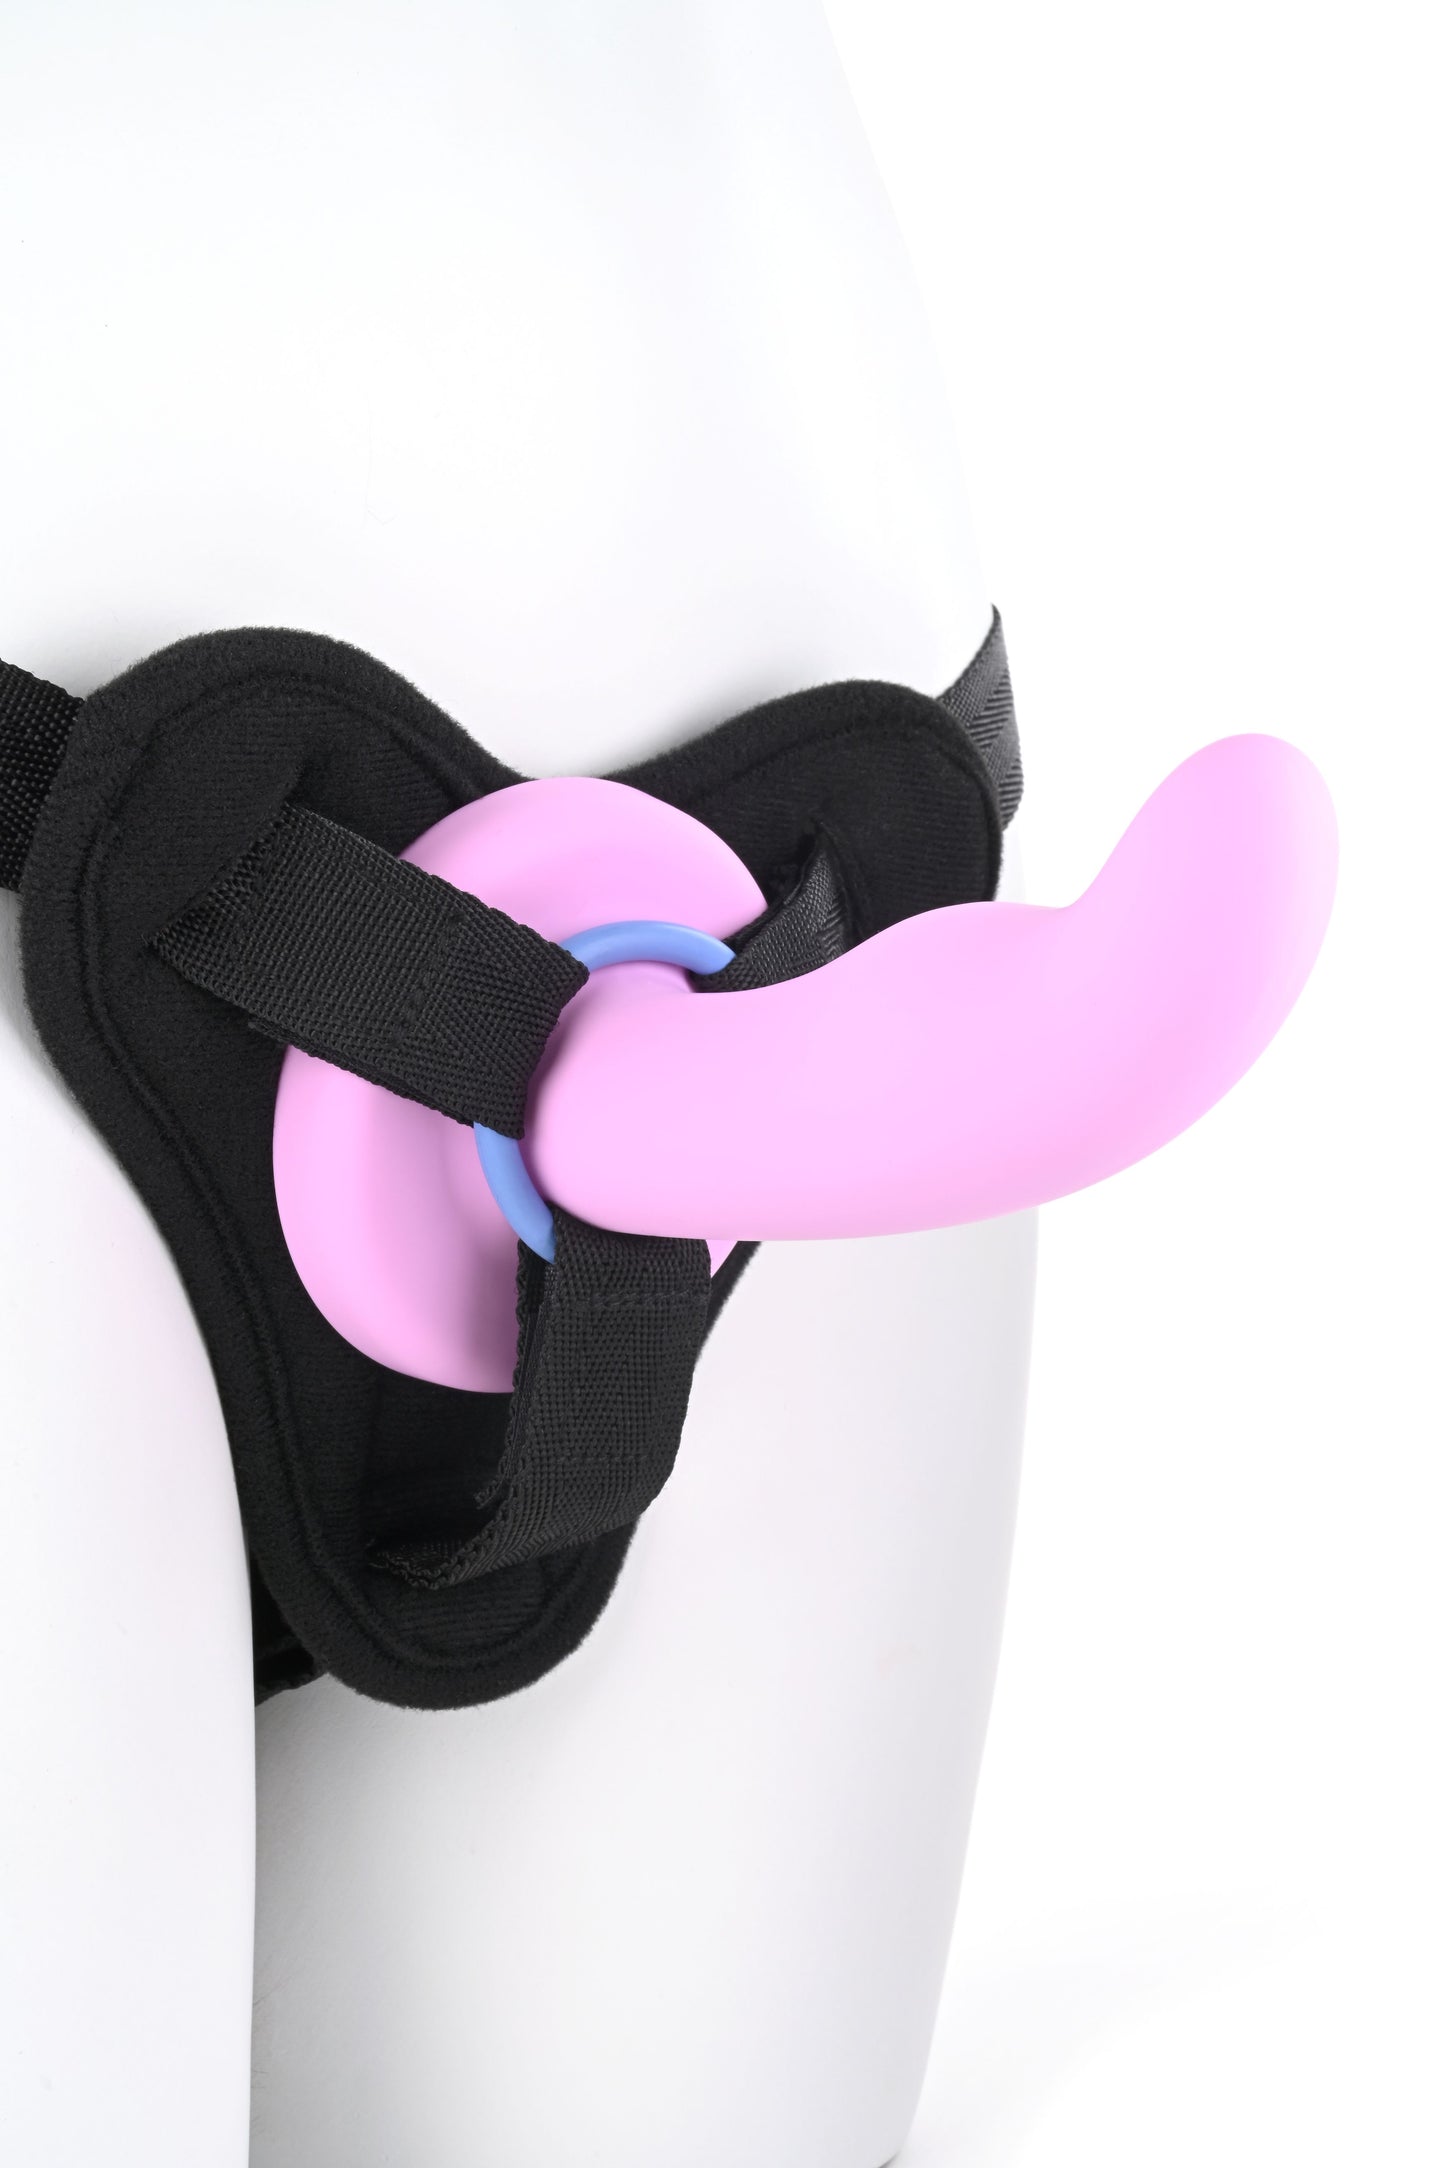 Close-up of the bottom portion of a mannequin wearing a harness with a dildo and using one of the O-rings (periwinkle).